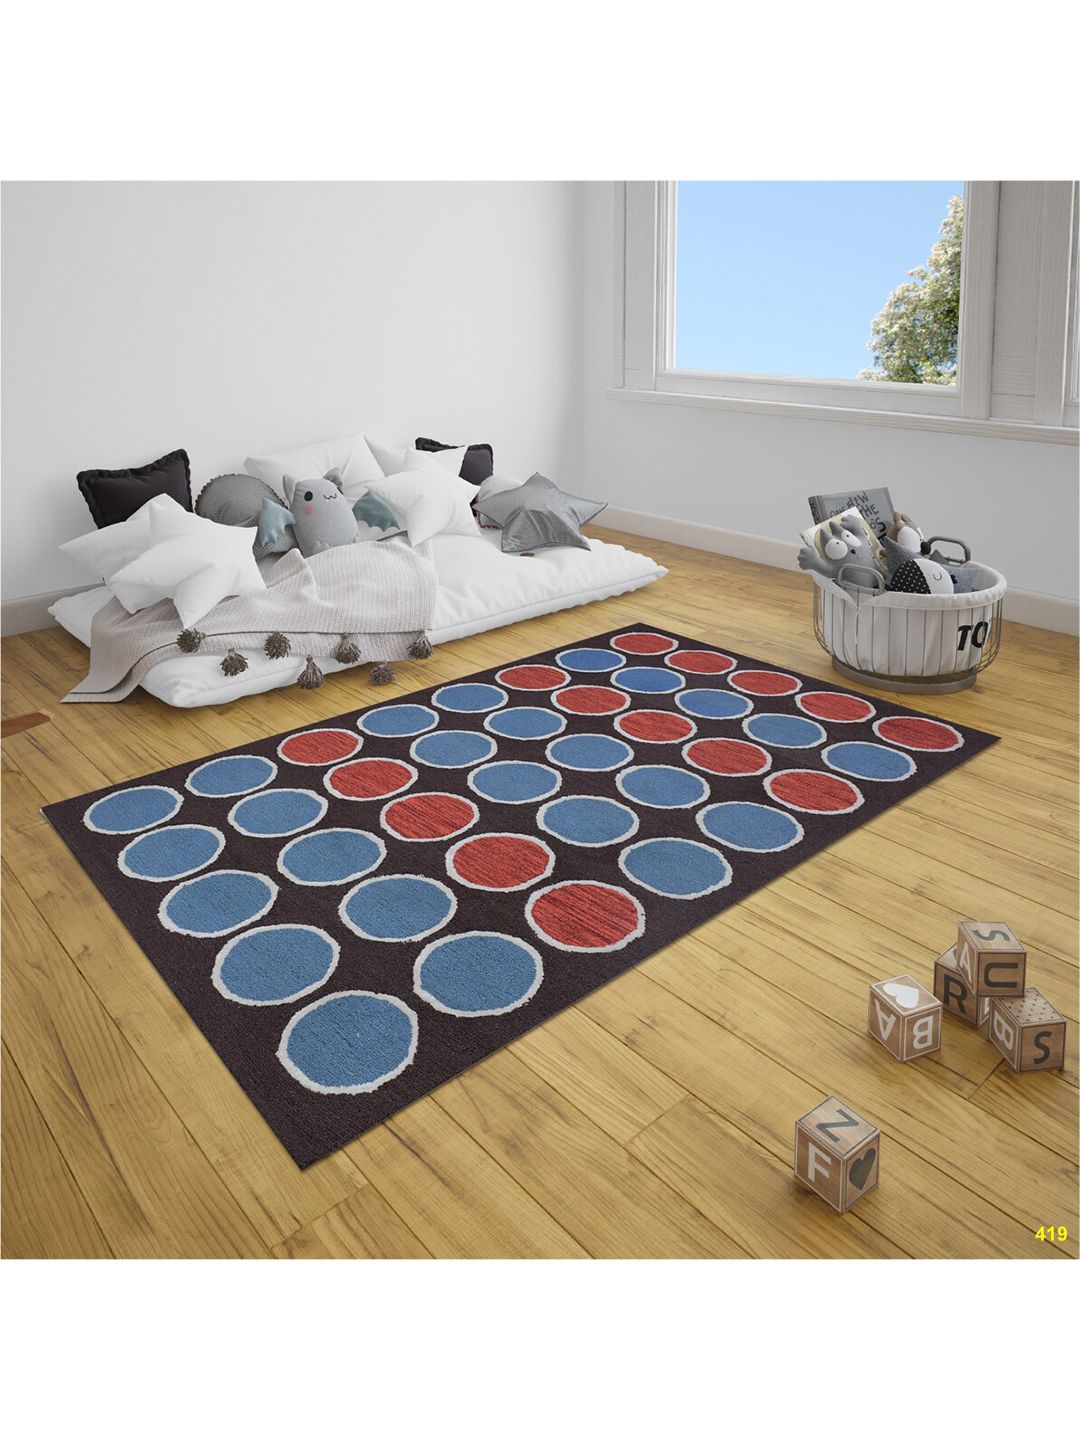 SANDED EDGE Blue & Red Hand Tufted Woolen Floor Carpet Price in India